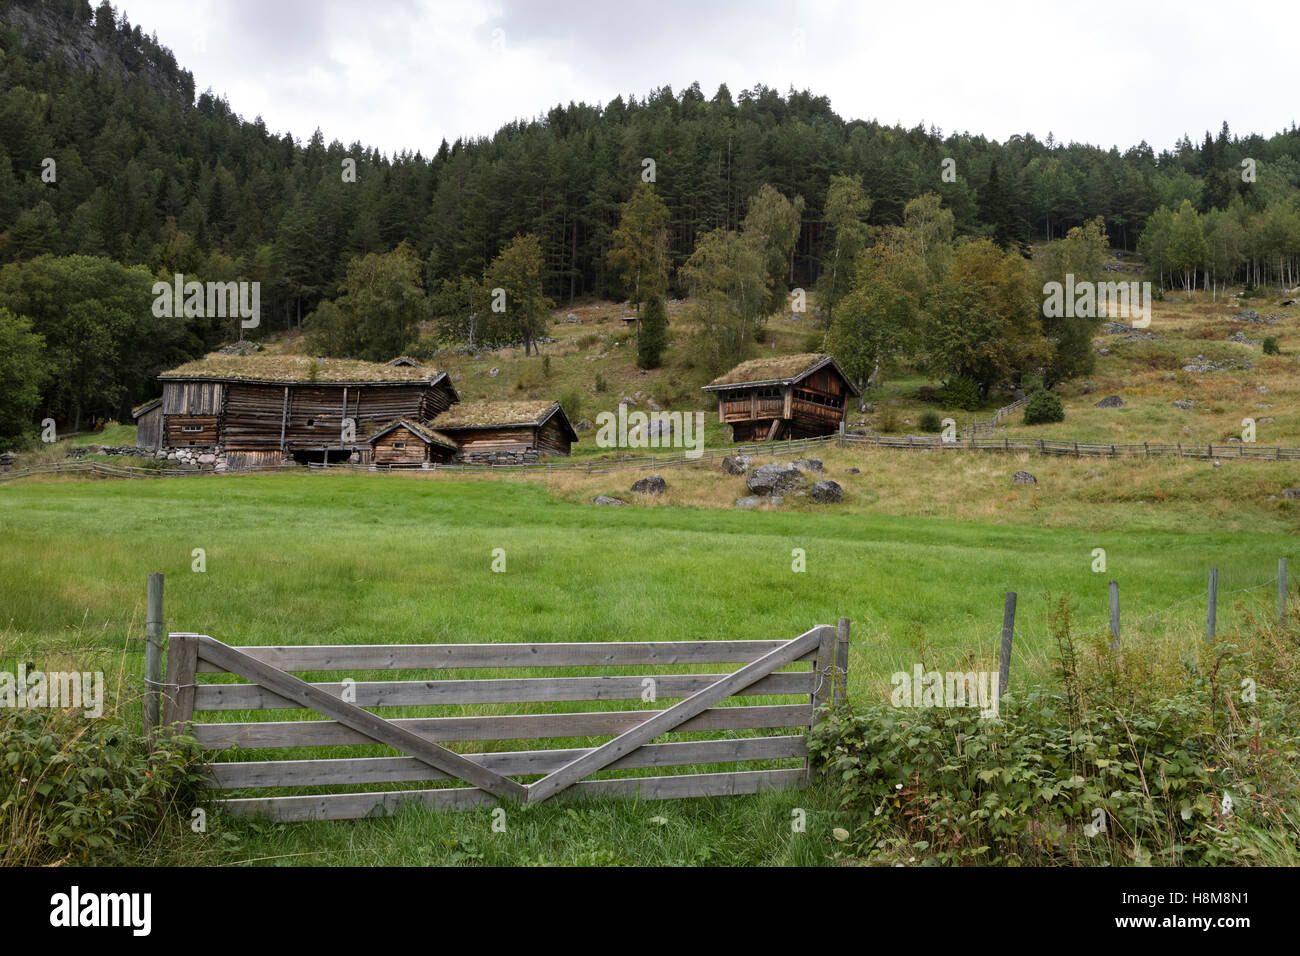 Farm house from the 16th century at Rygnestadtunet in the Setesdal, Norway Stock Photo